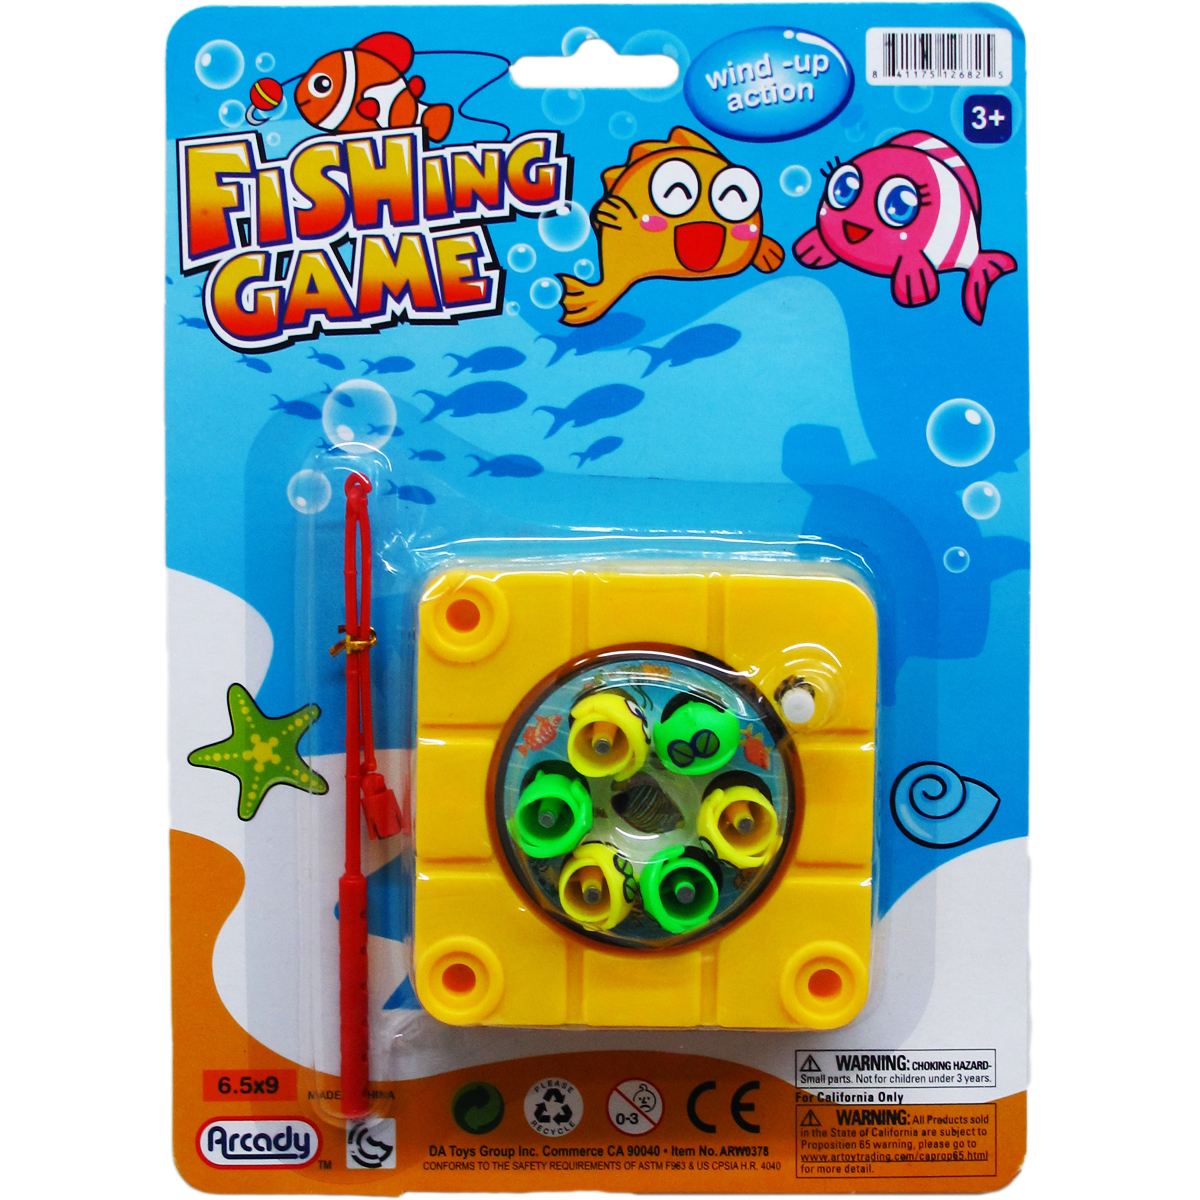 Wholesale Fishing Games 48 Count, Plastic